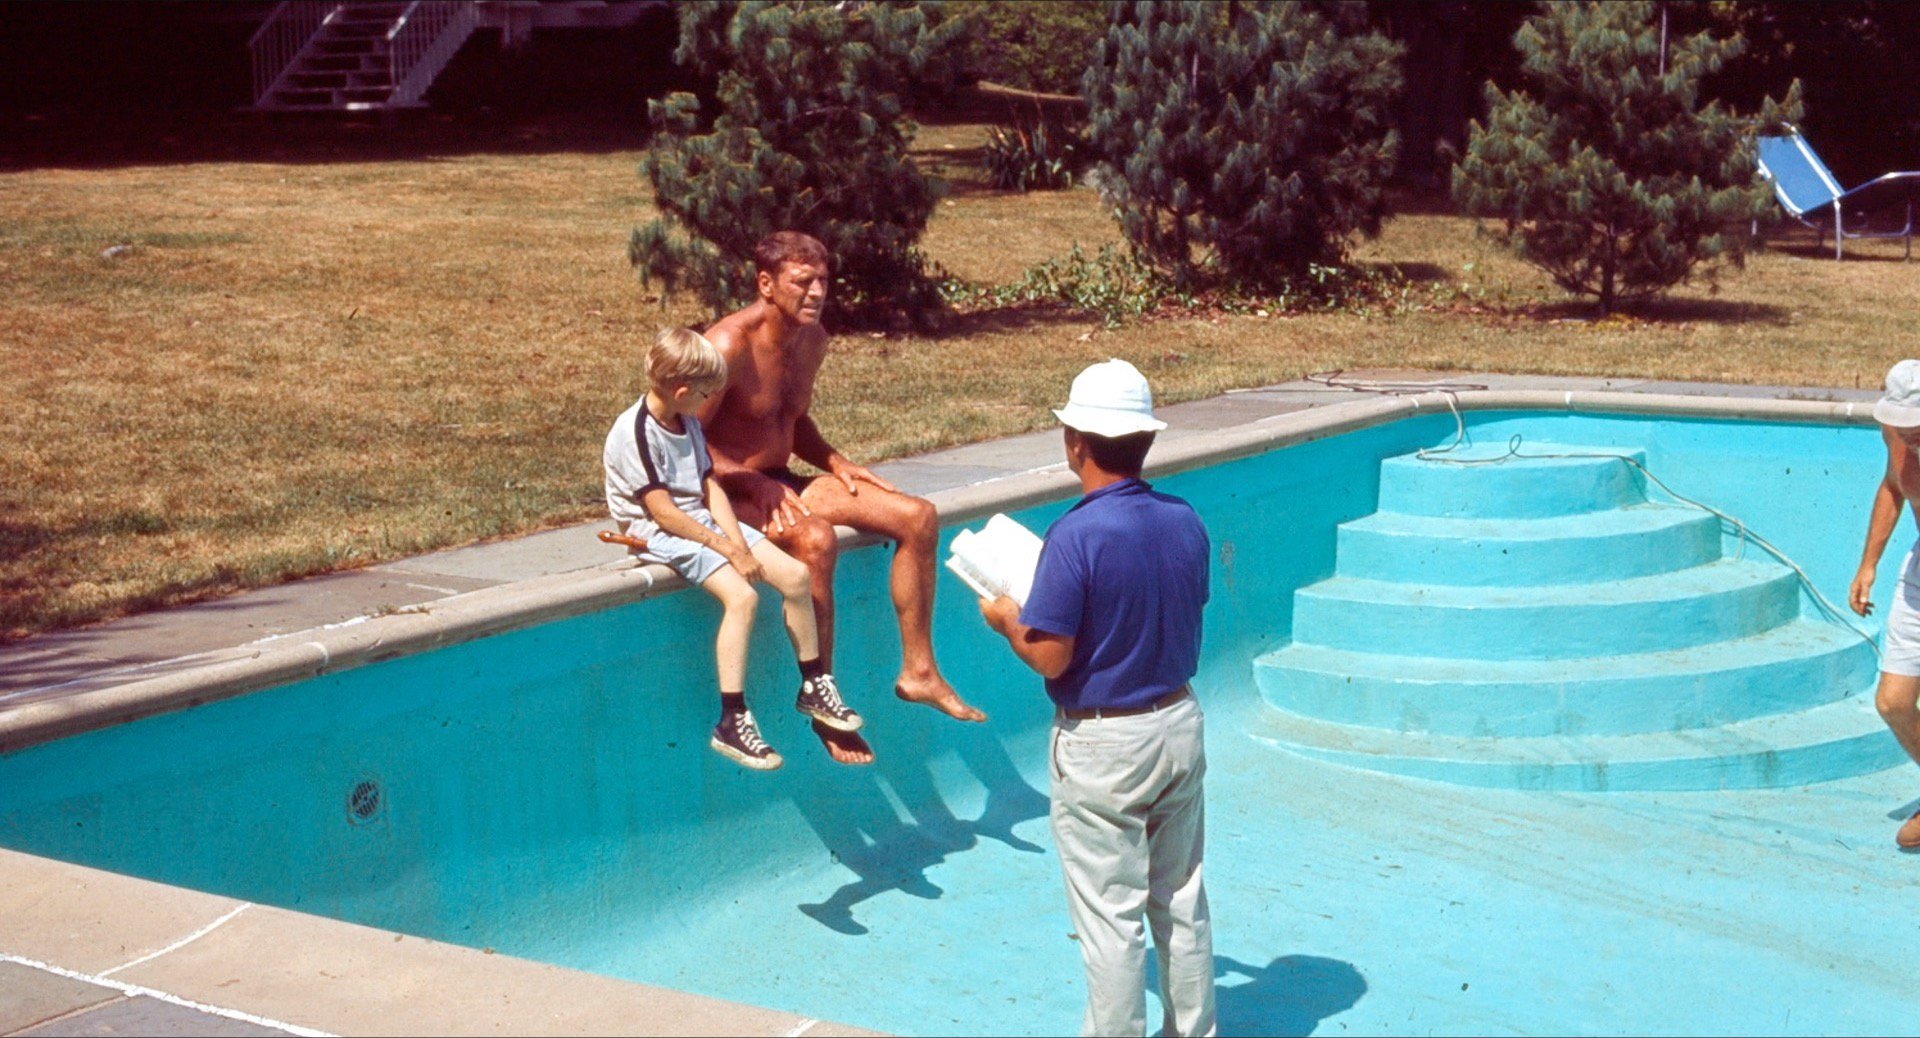 The Swimmer, Frank Perry, 1968, Backstage Photo